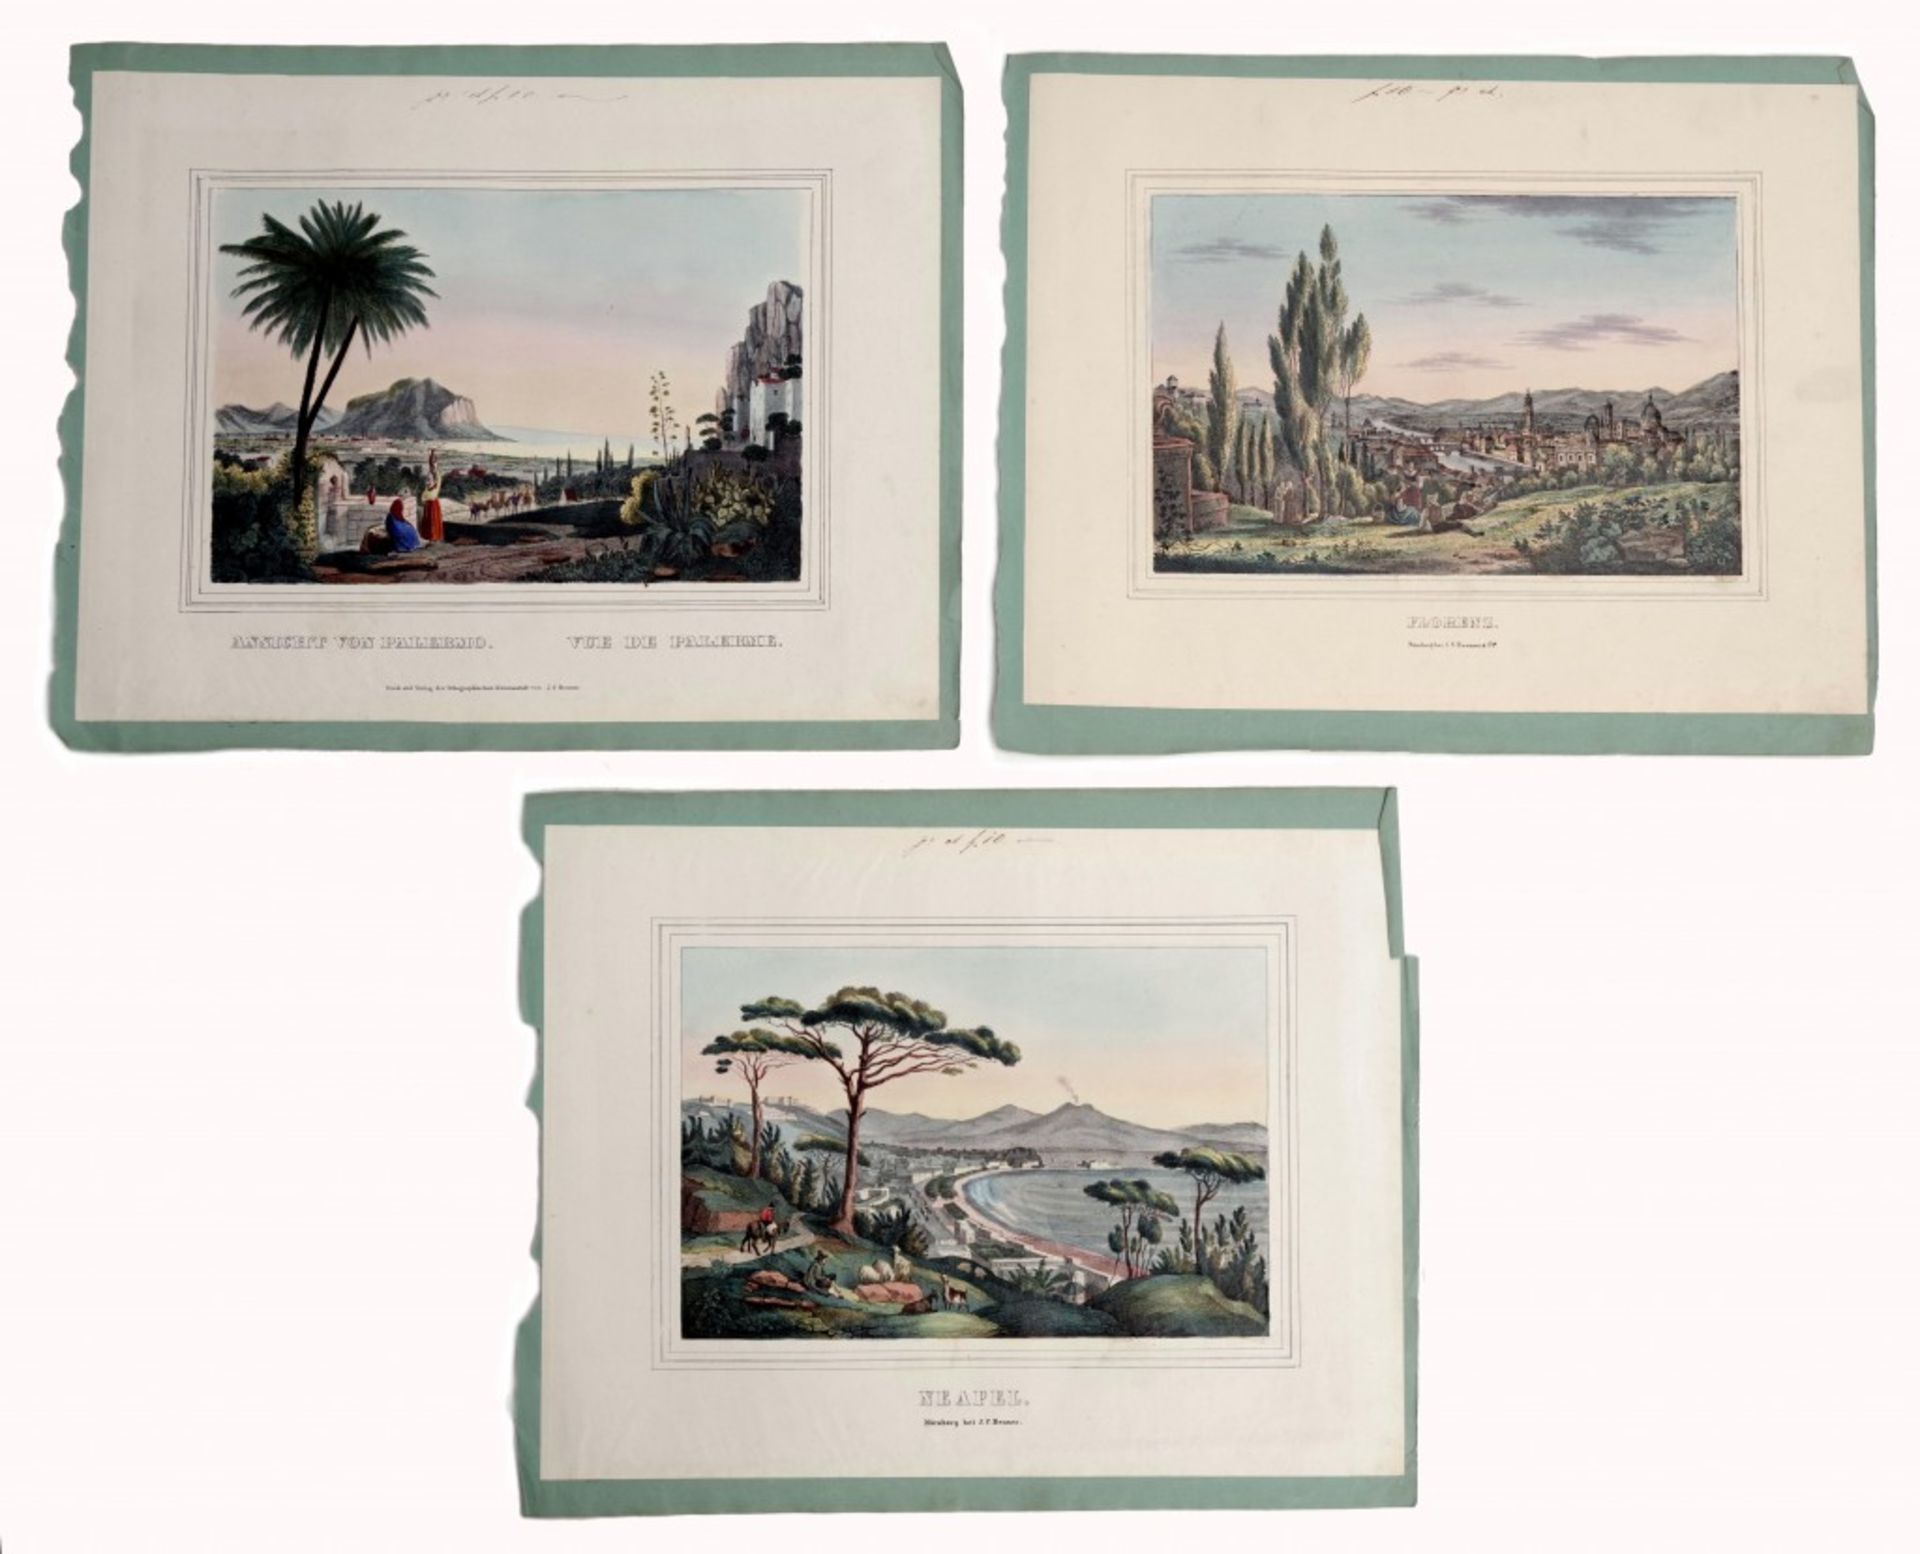 A Palermo- Florence and Naples by J. C. Renner and G. N. Renner